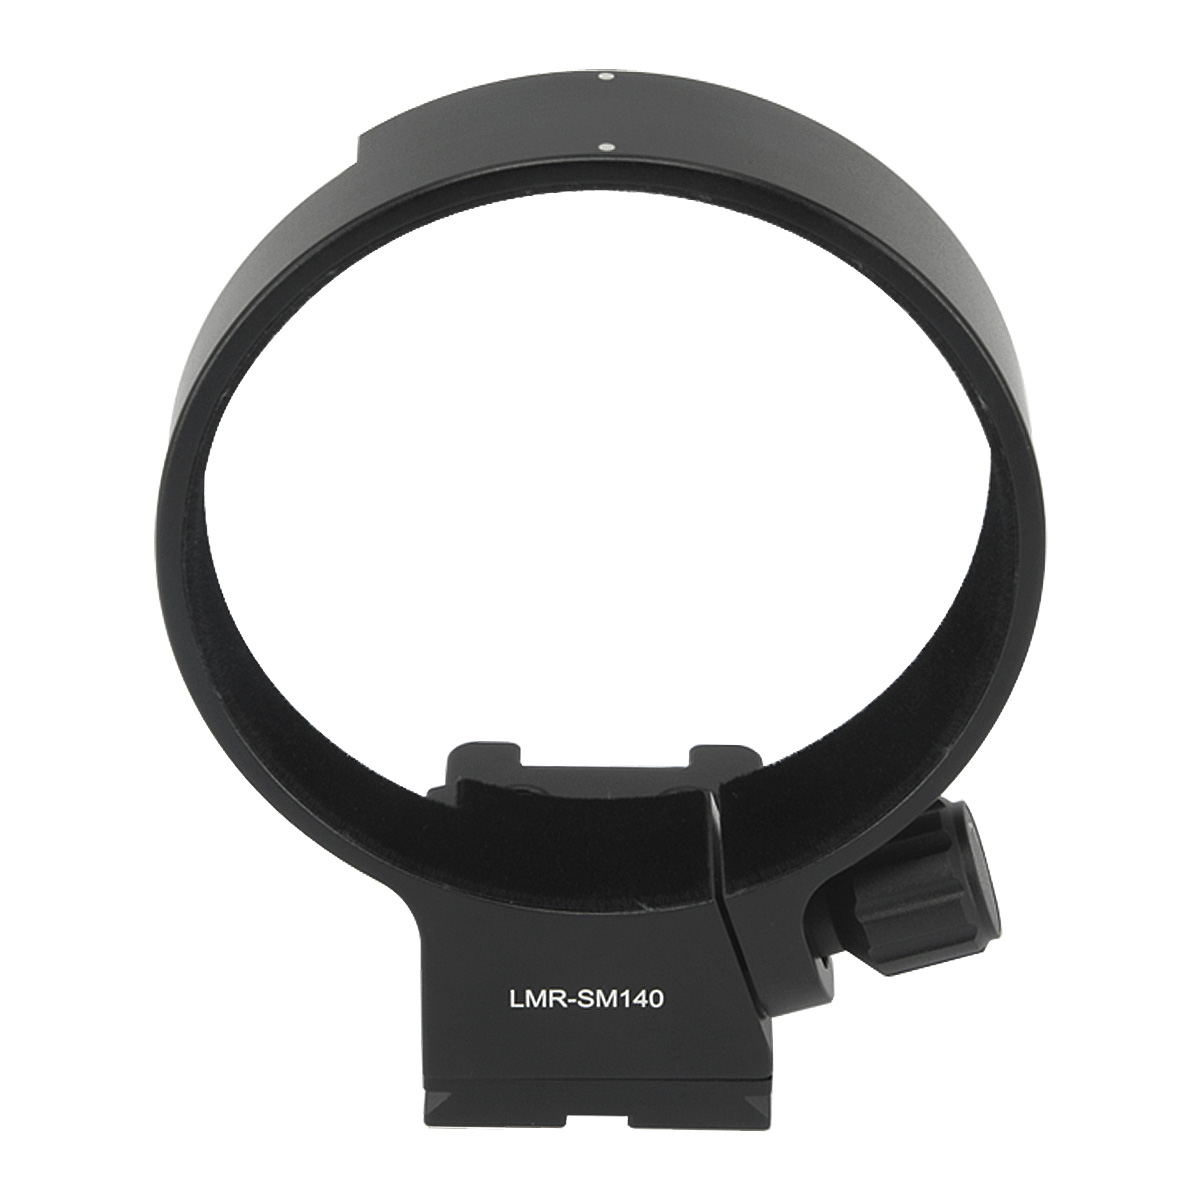 Haoge LMR-SM140 Lens Collar Replacement Foot Tripod Mount Ring Socket Stand Base for Sigma 100-400mm f/5-6.3 DG OS HSM Contemporary Lens Built-in Arca Type Quick Release Plate